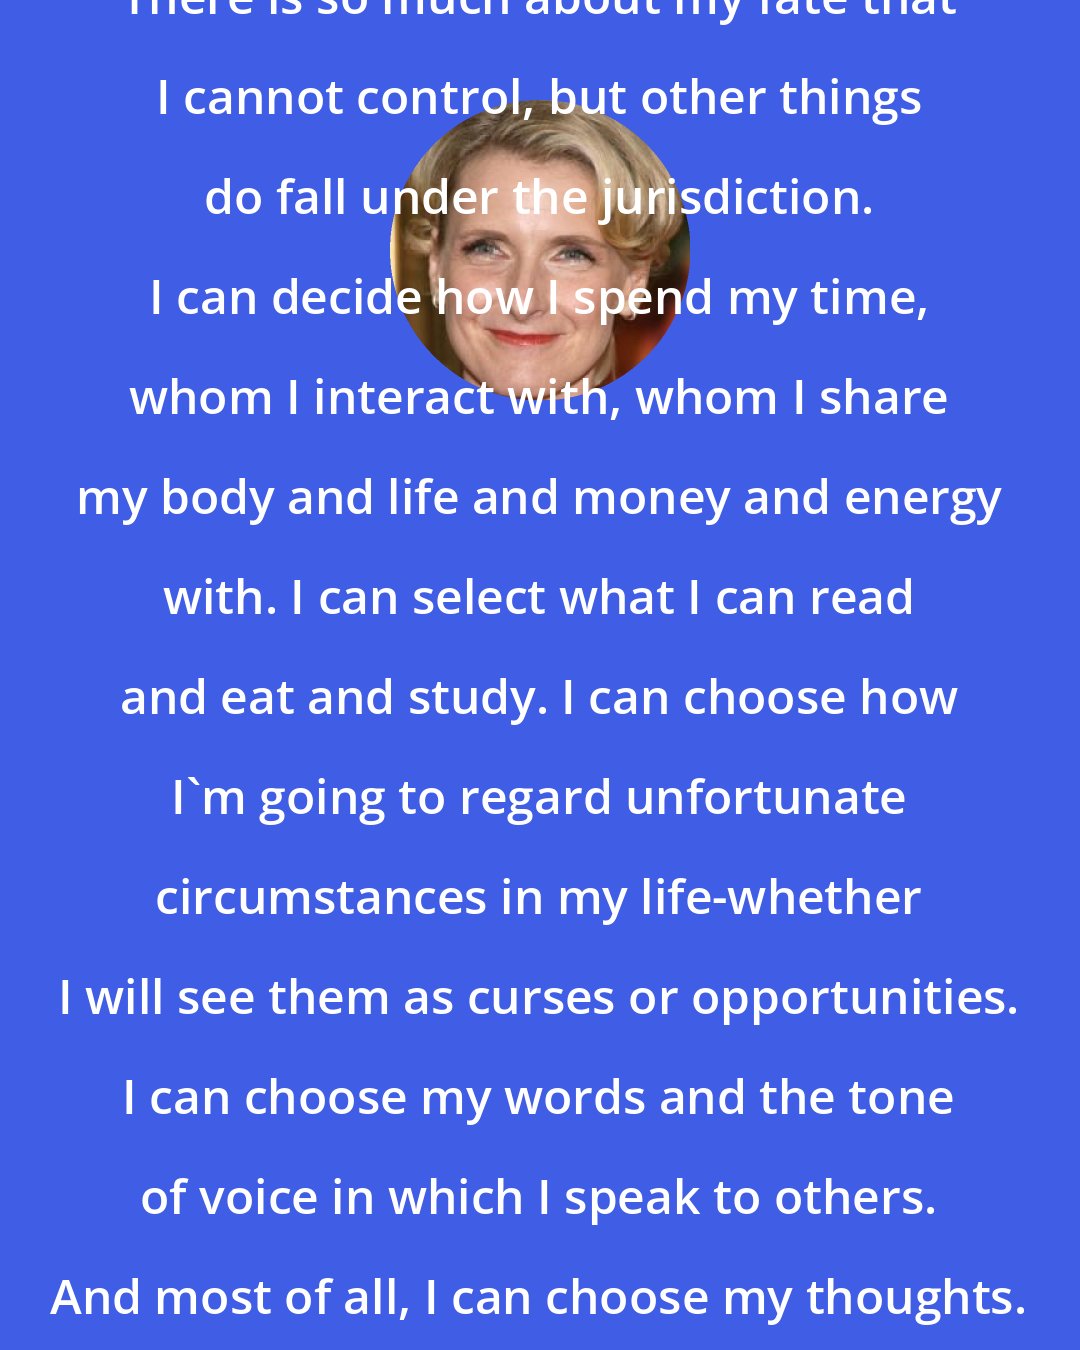 Elizabeth Gilbert: There is so much about my fate that I cannot control, but other things do fall under the jurisdiction. I can decide how I spend my time, whom I interact with, whom I share my body and life and money and energy with. I can select what I can read and eat and study. I can choose how I'm going to regard unfortunate circumstances in my life-whether I will see them as curses or opportunities. I can choose my words and the tone of voice in which I speak to others. And most of all, I can choose my thoughts.